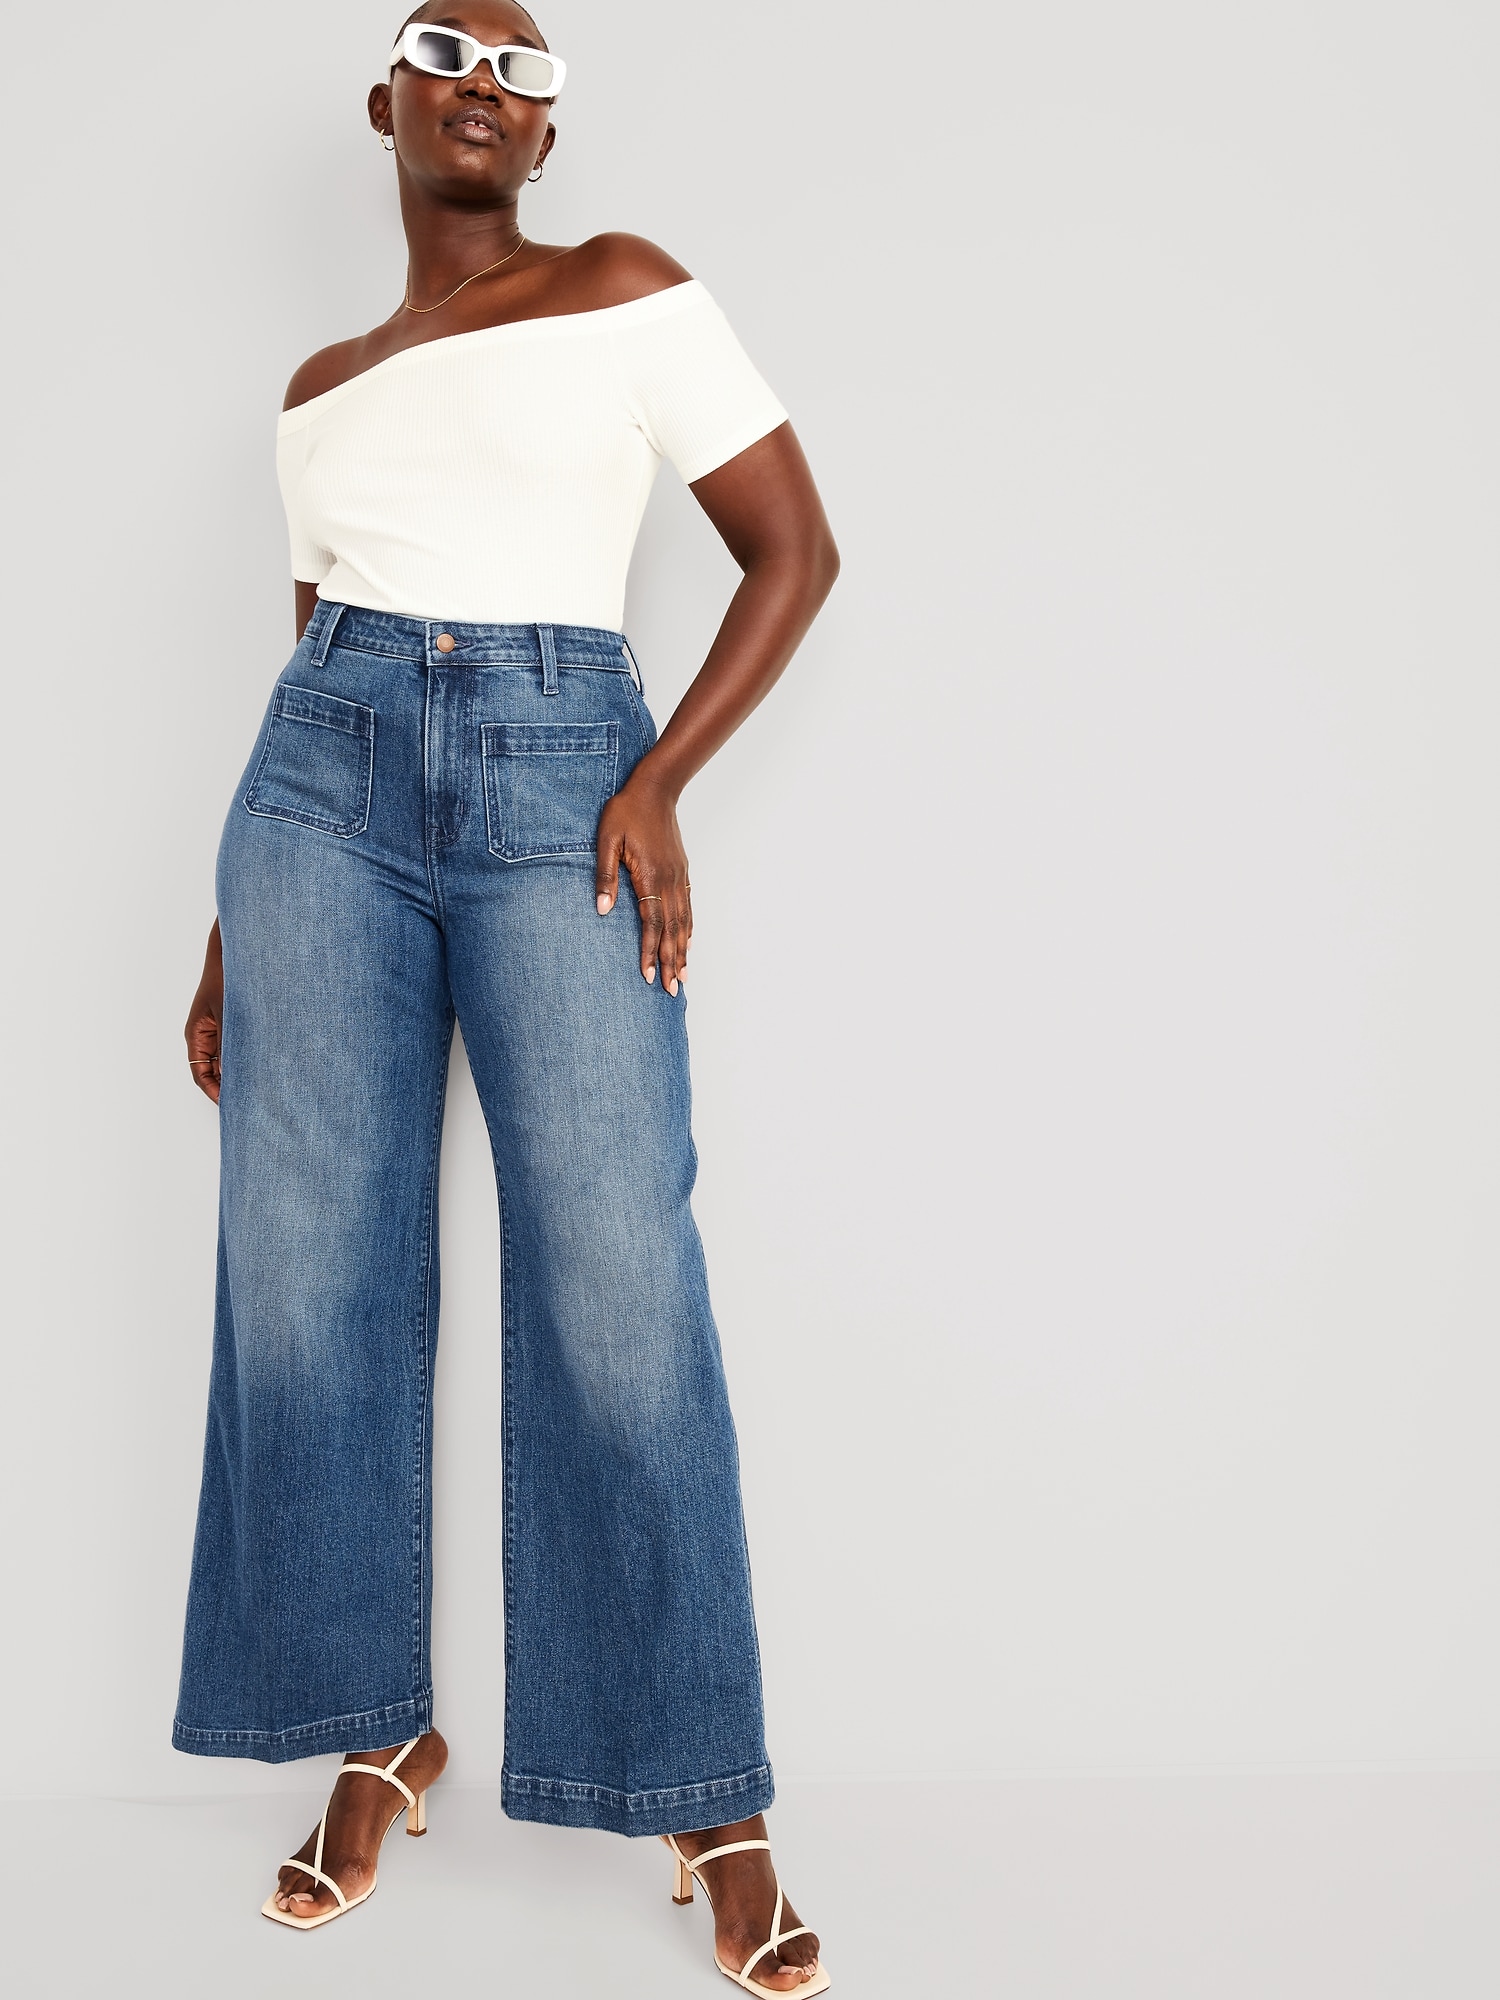 Extra High-Waisted Flare Jeans for Women, Old Navy